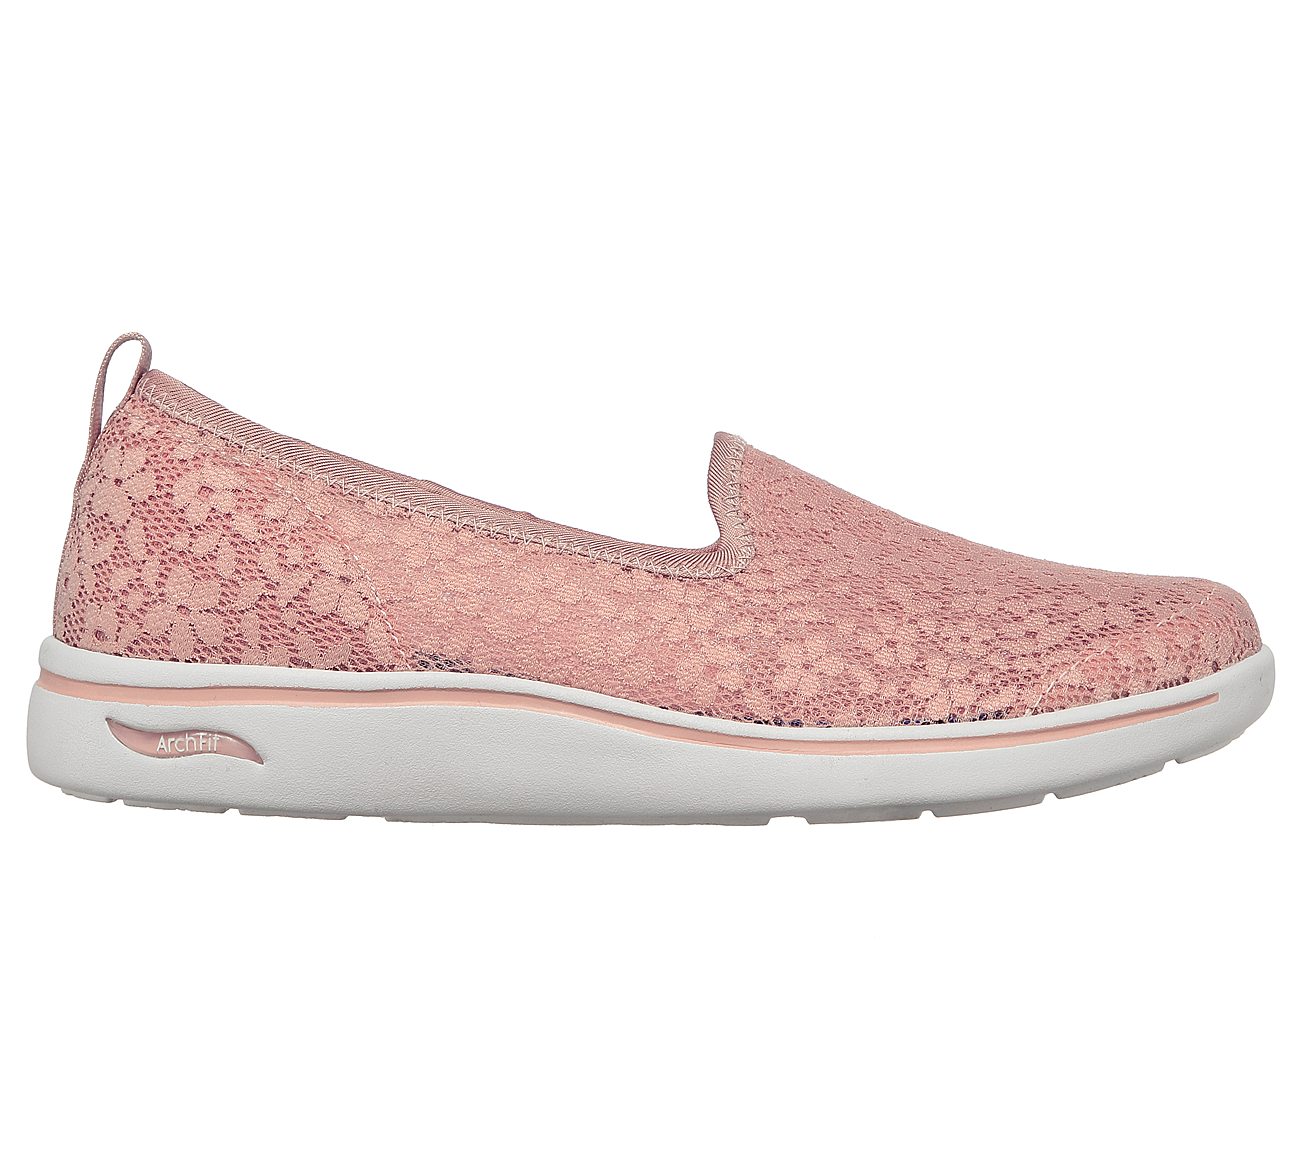 ARCH FIT UPLIFT - ROMANTIC, MMAUVE Footwear Lateral View